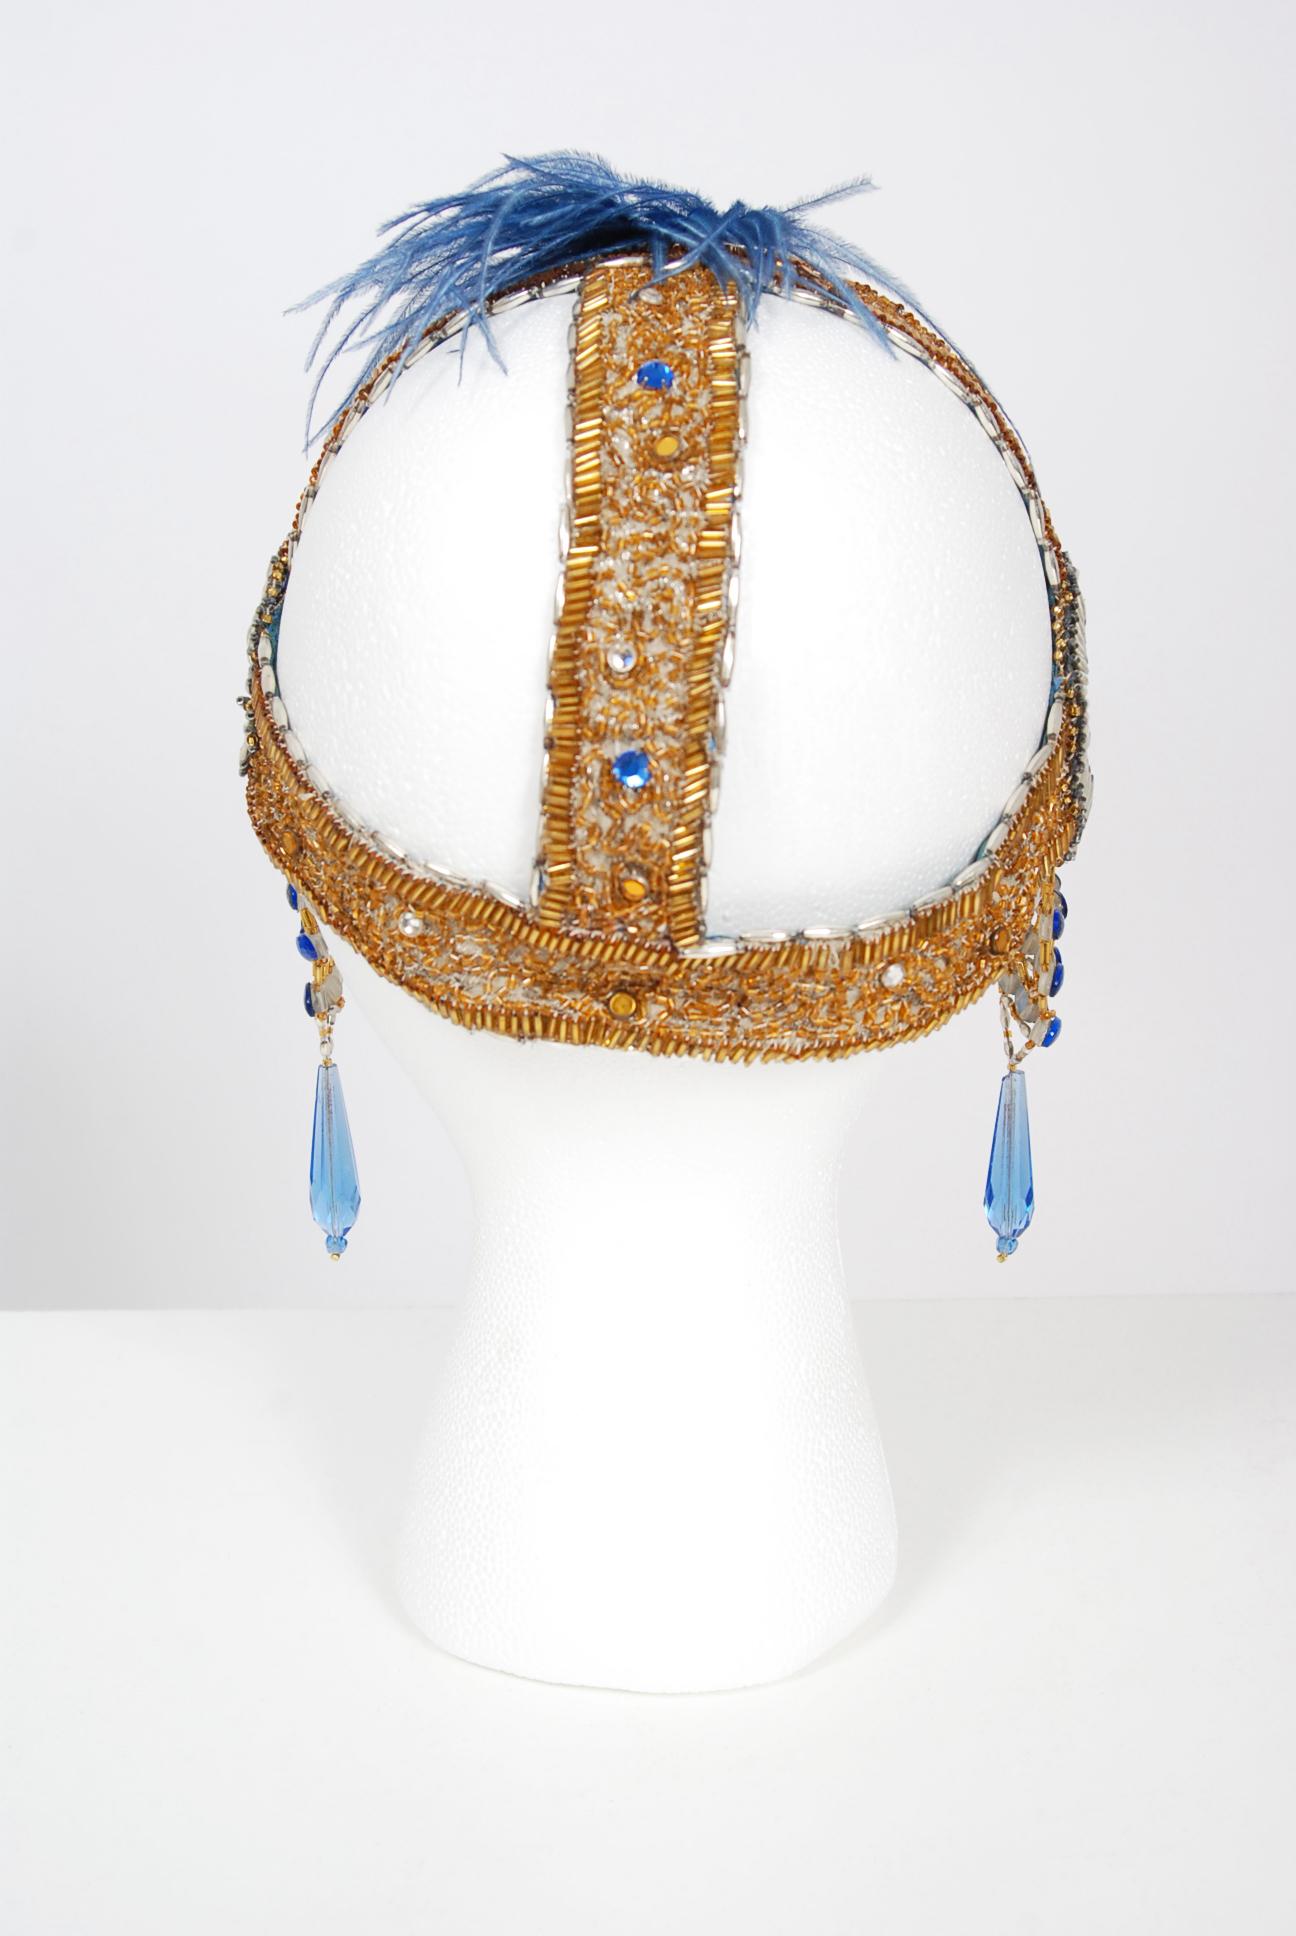 Vintage 1920's French Couture Gold Beaded Blue Jeweled Flapper Crown Headpiece  2